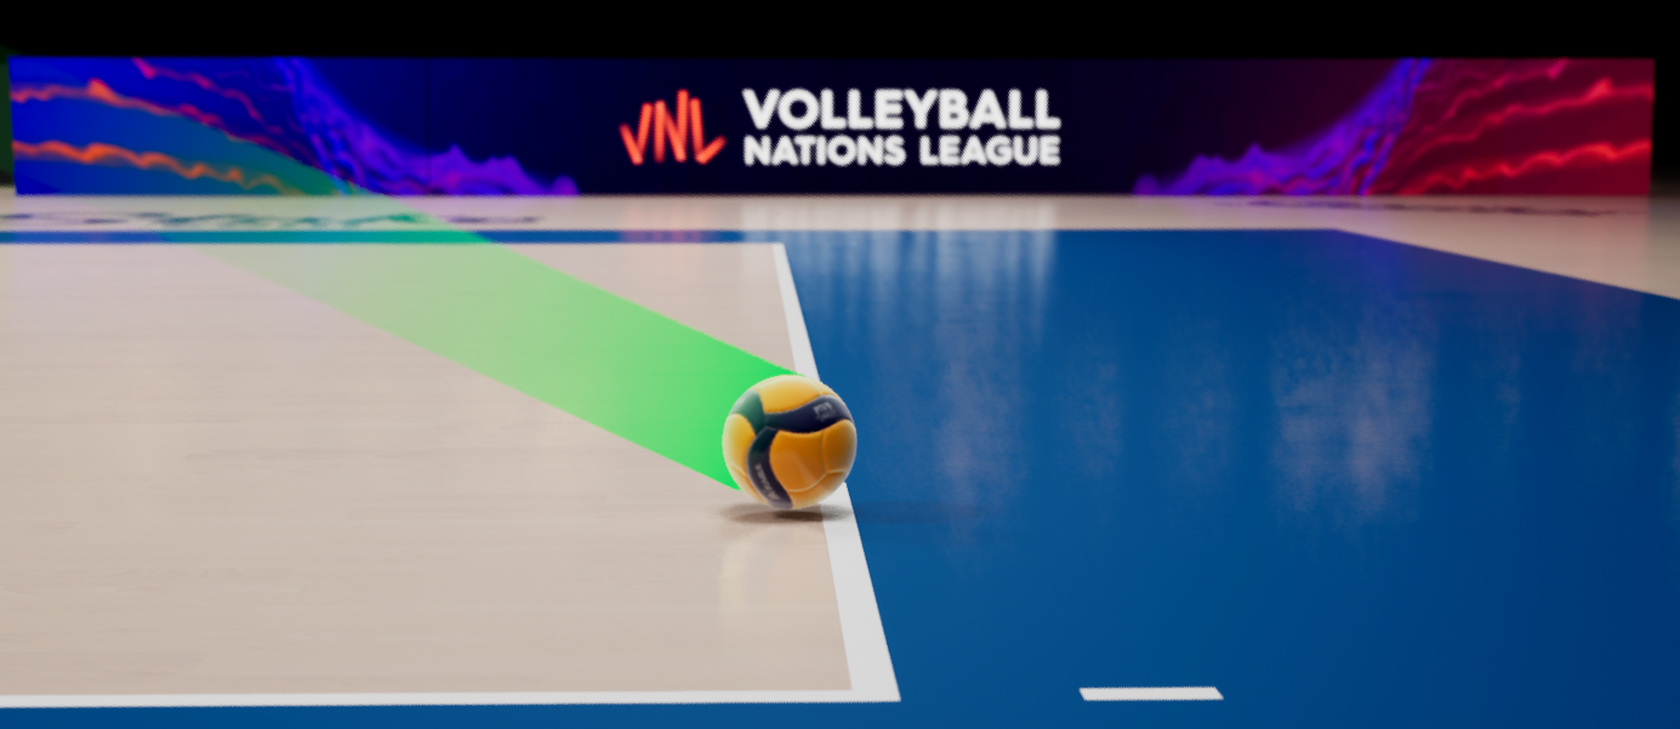 Volleyball World partners with Bolt6 to improve video challenge system